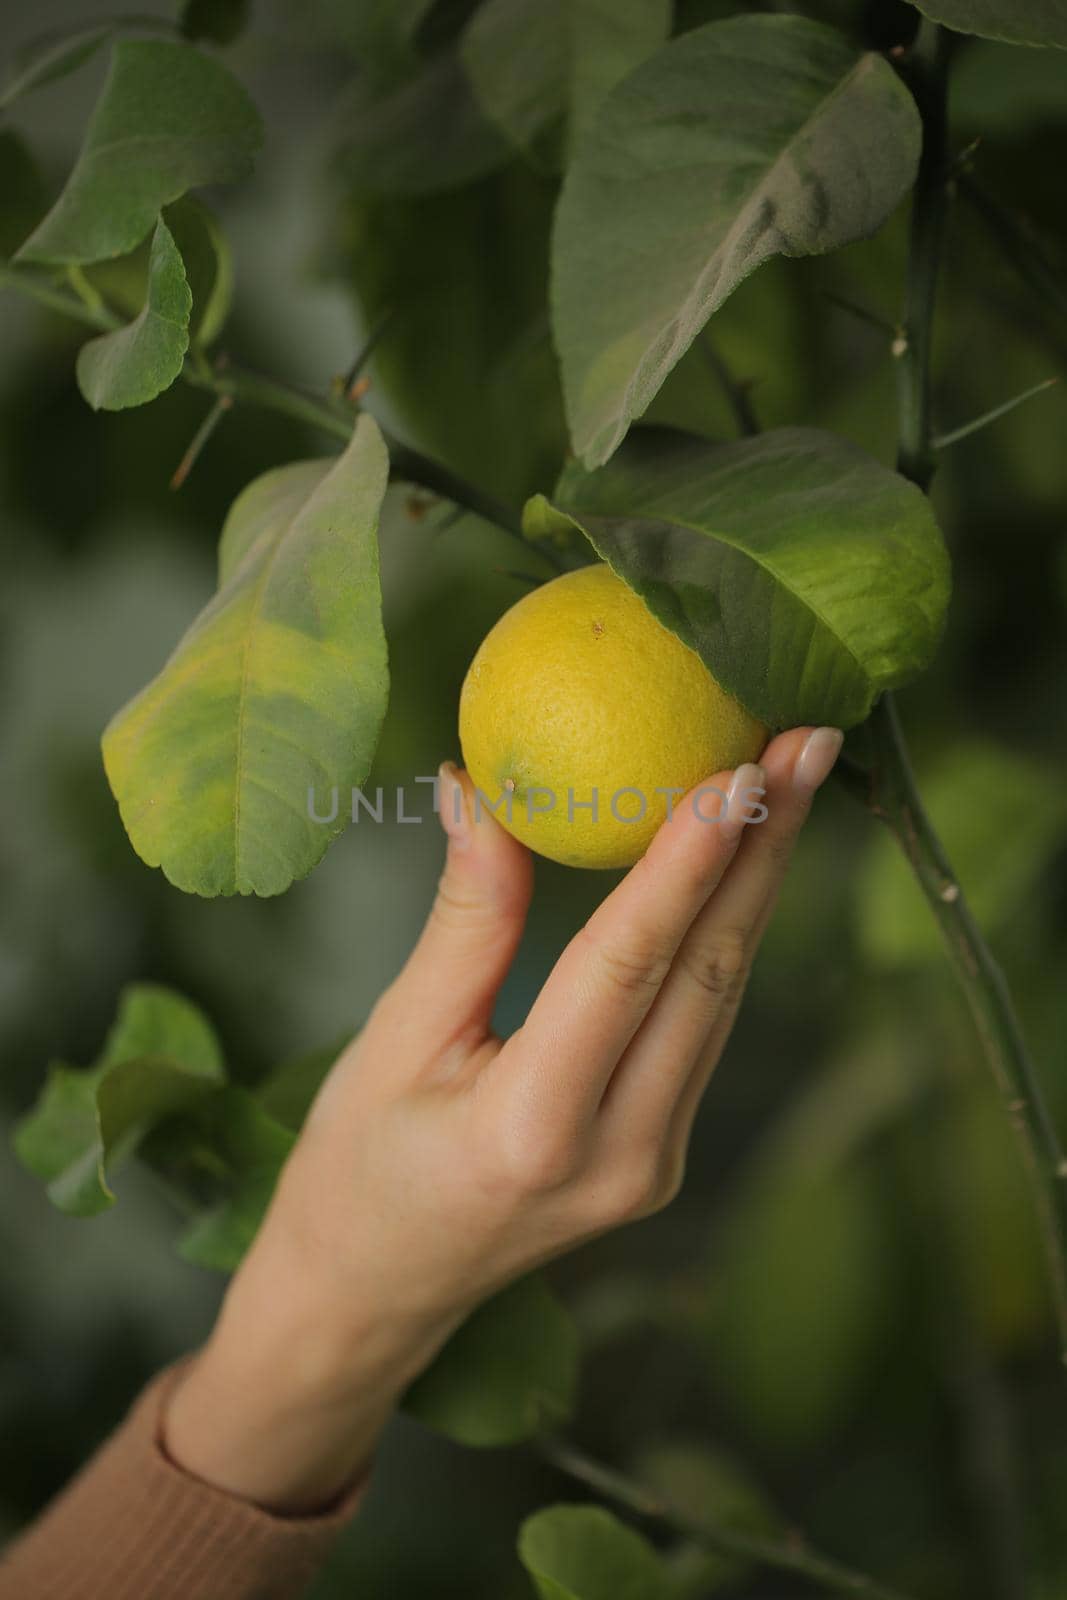 girl picking a ripe lemon with her hand. Focus on man’s hand